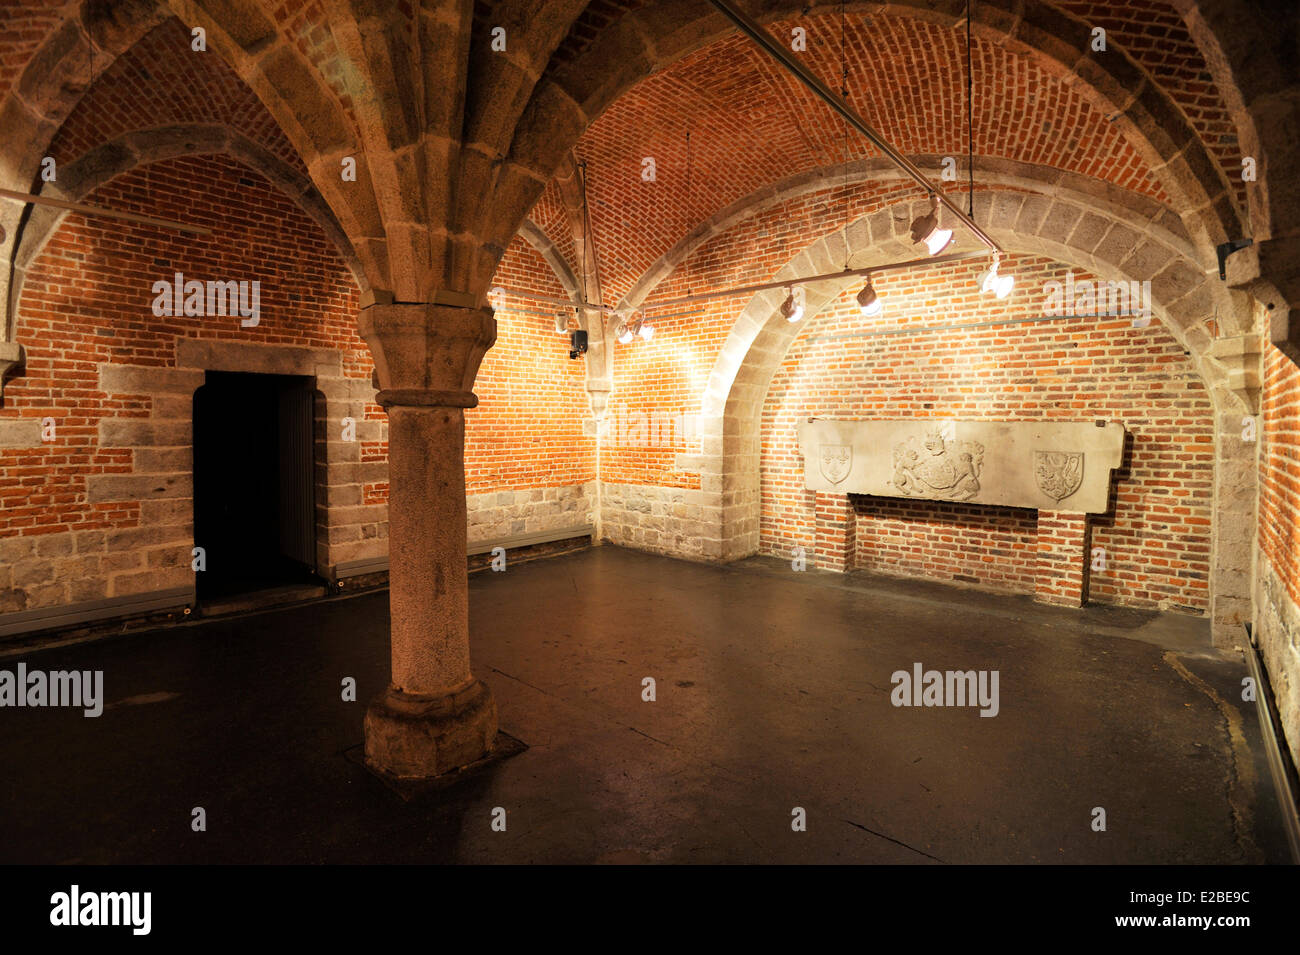 France, Nord, Douai, City Hall, dungeons with vaulted ceilings Stock Photo